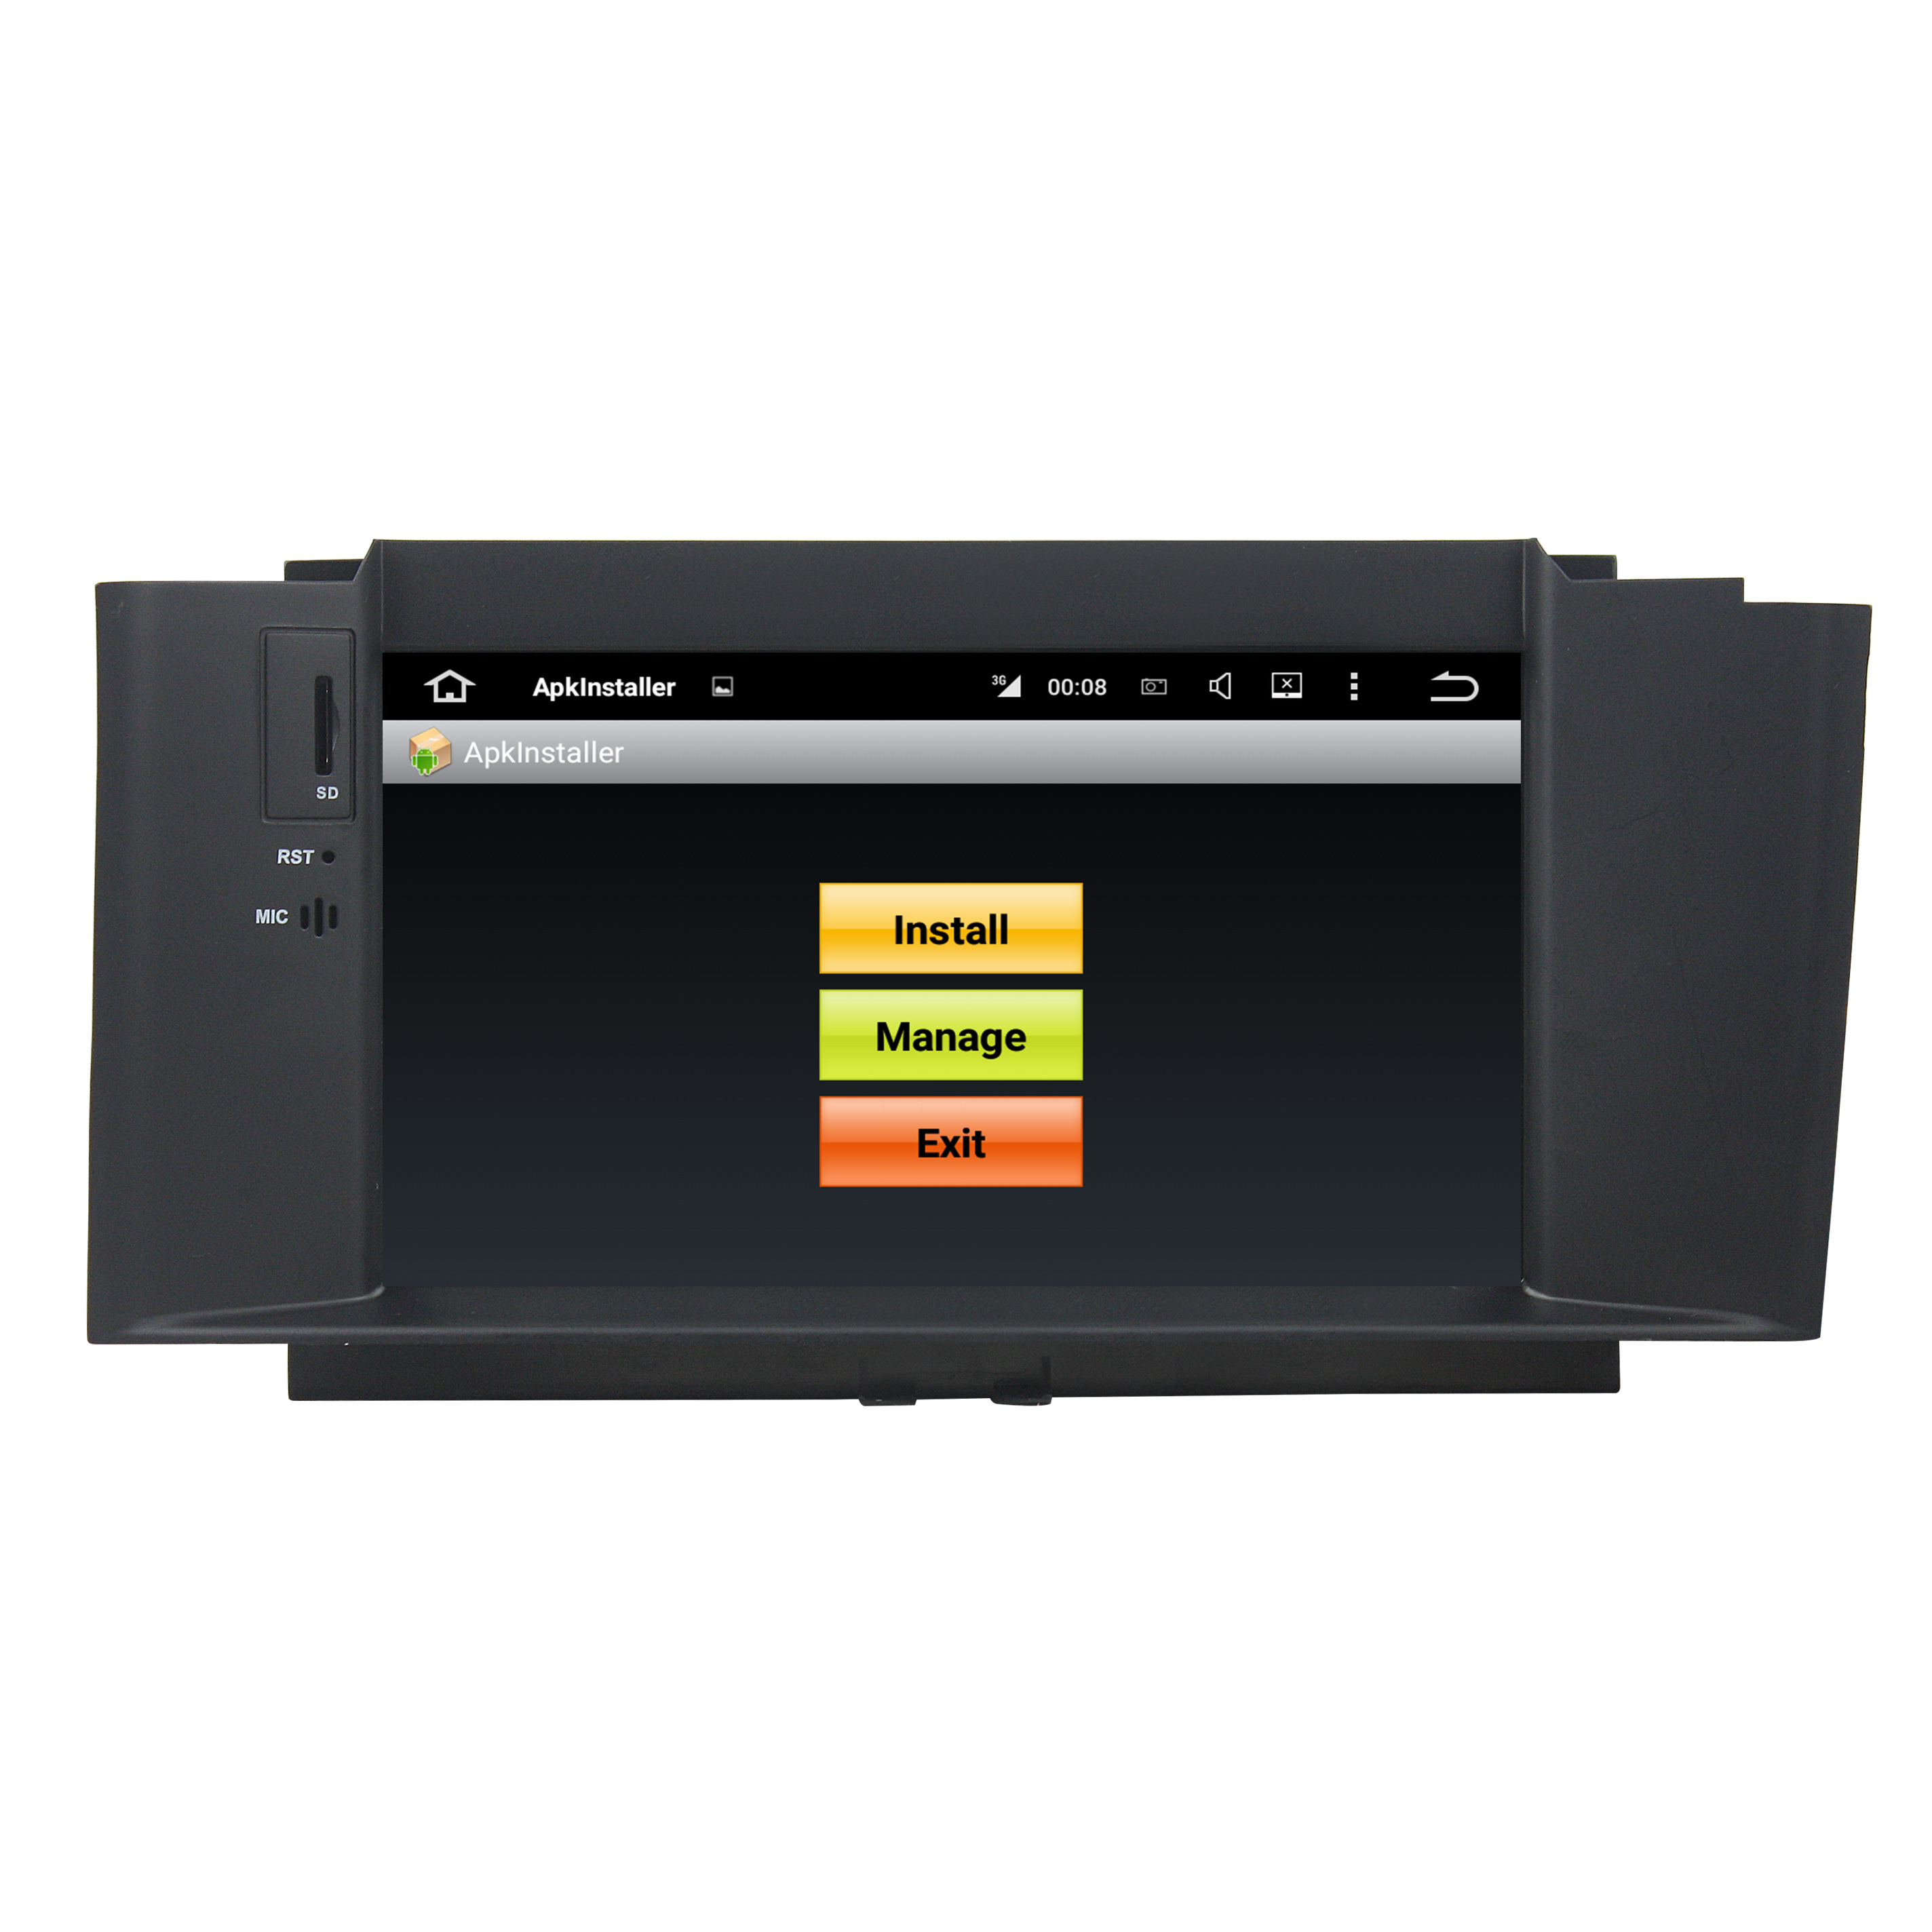 C4 2012-2014 canbus included dvd player